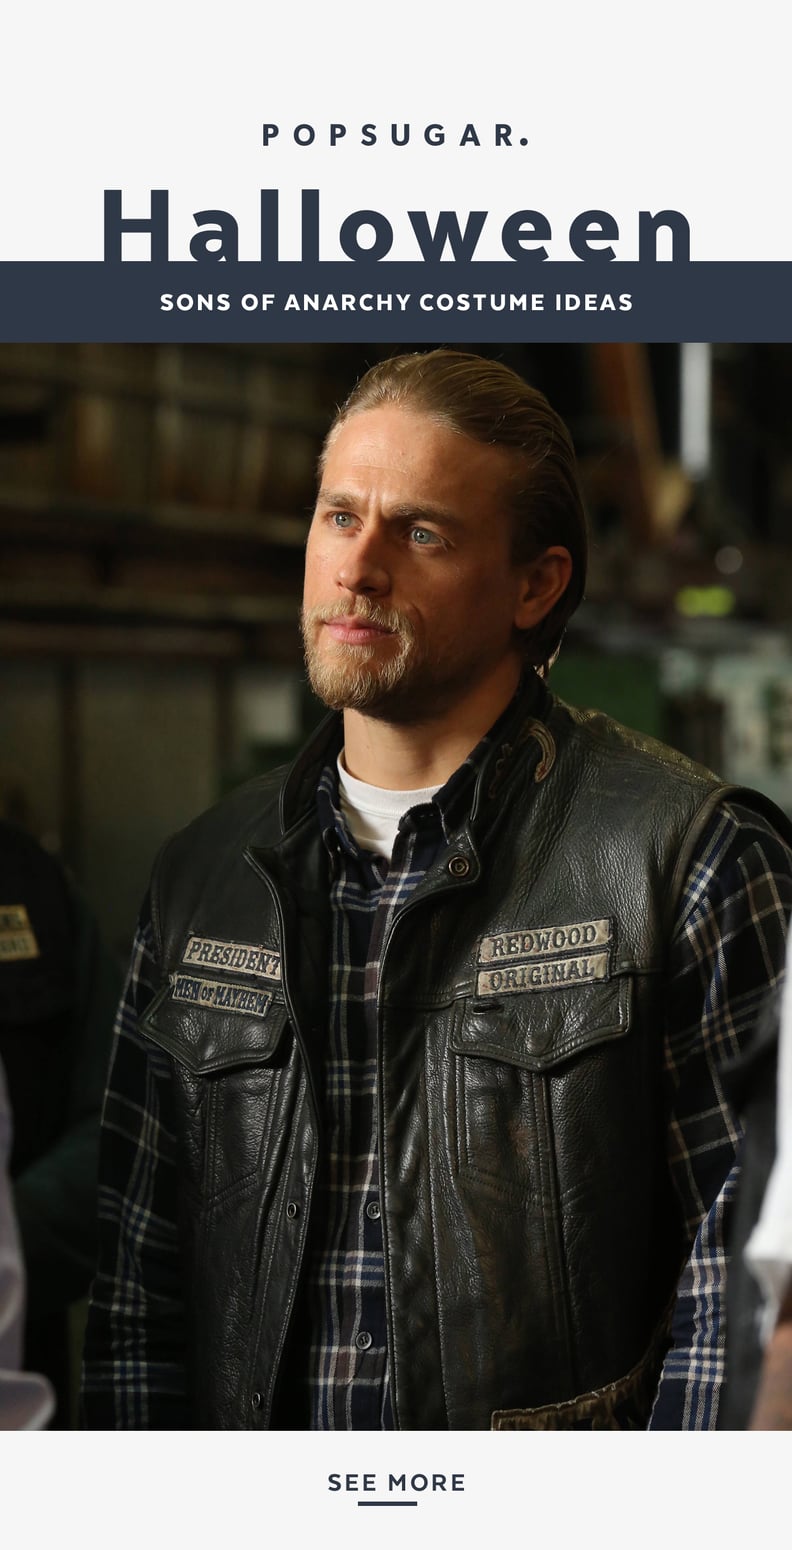 Sons of Anarchy Halloween Costumes